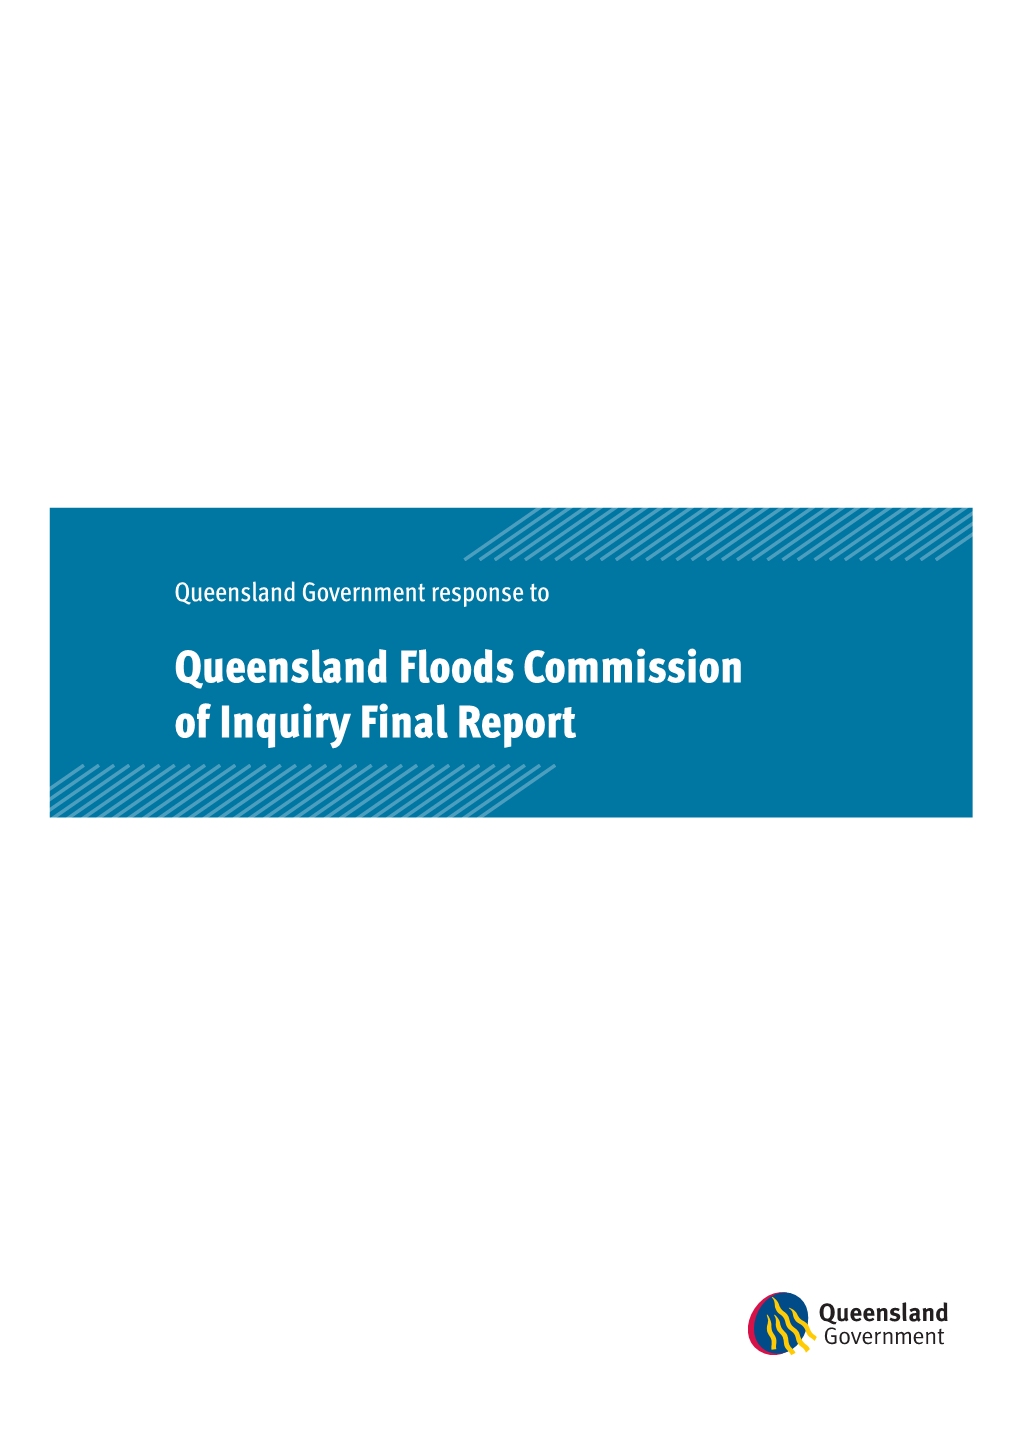 Queensland Floods Commission of Inquiry Final Report